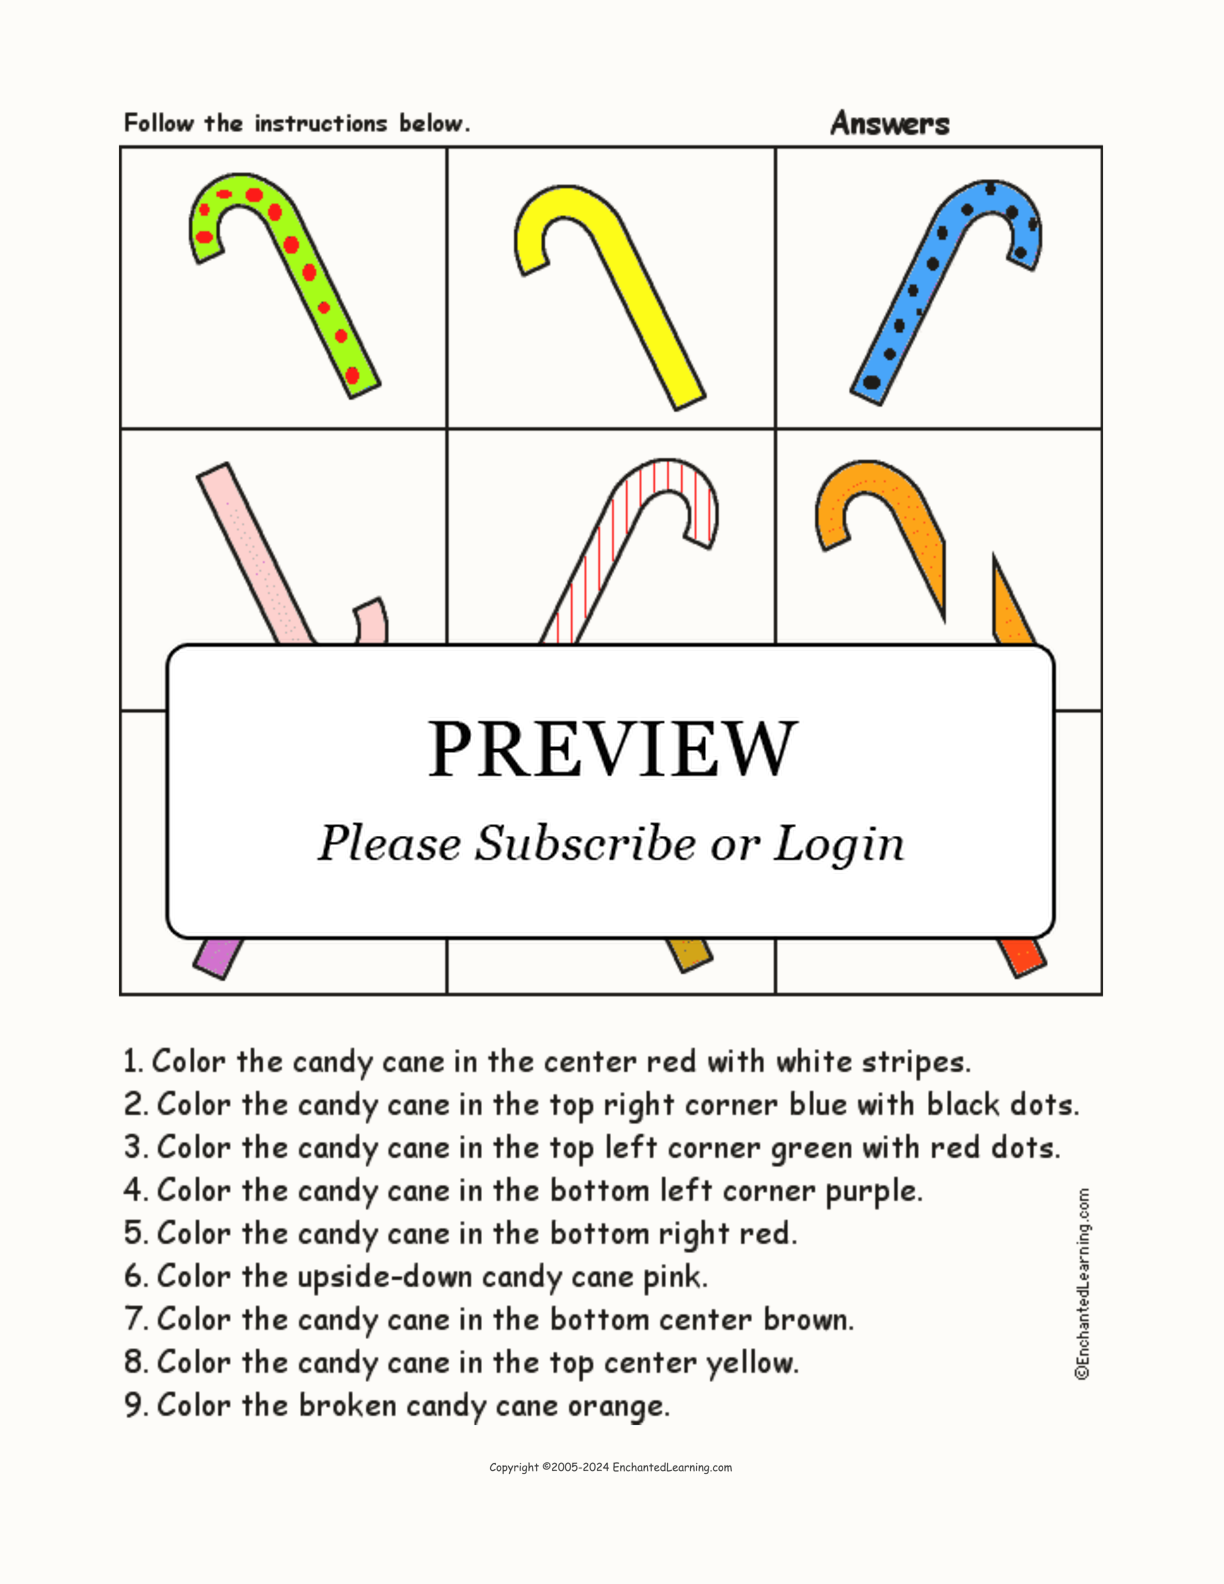 Candy Canes - Follow the Instructions interactive worksheet page 2